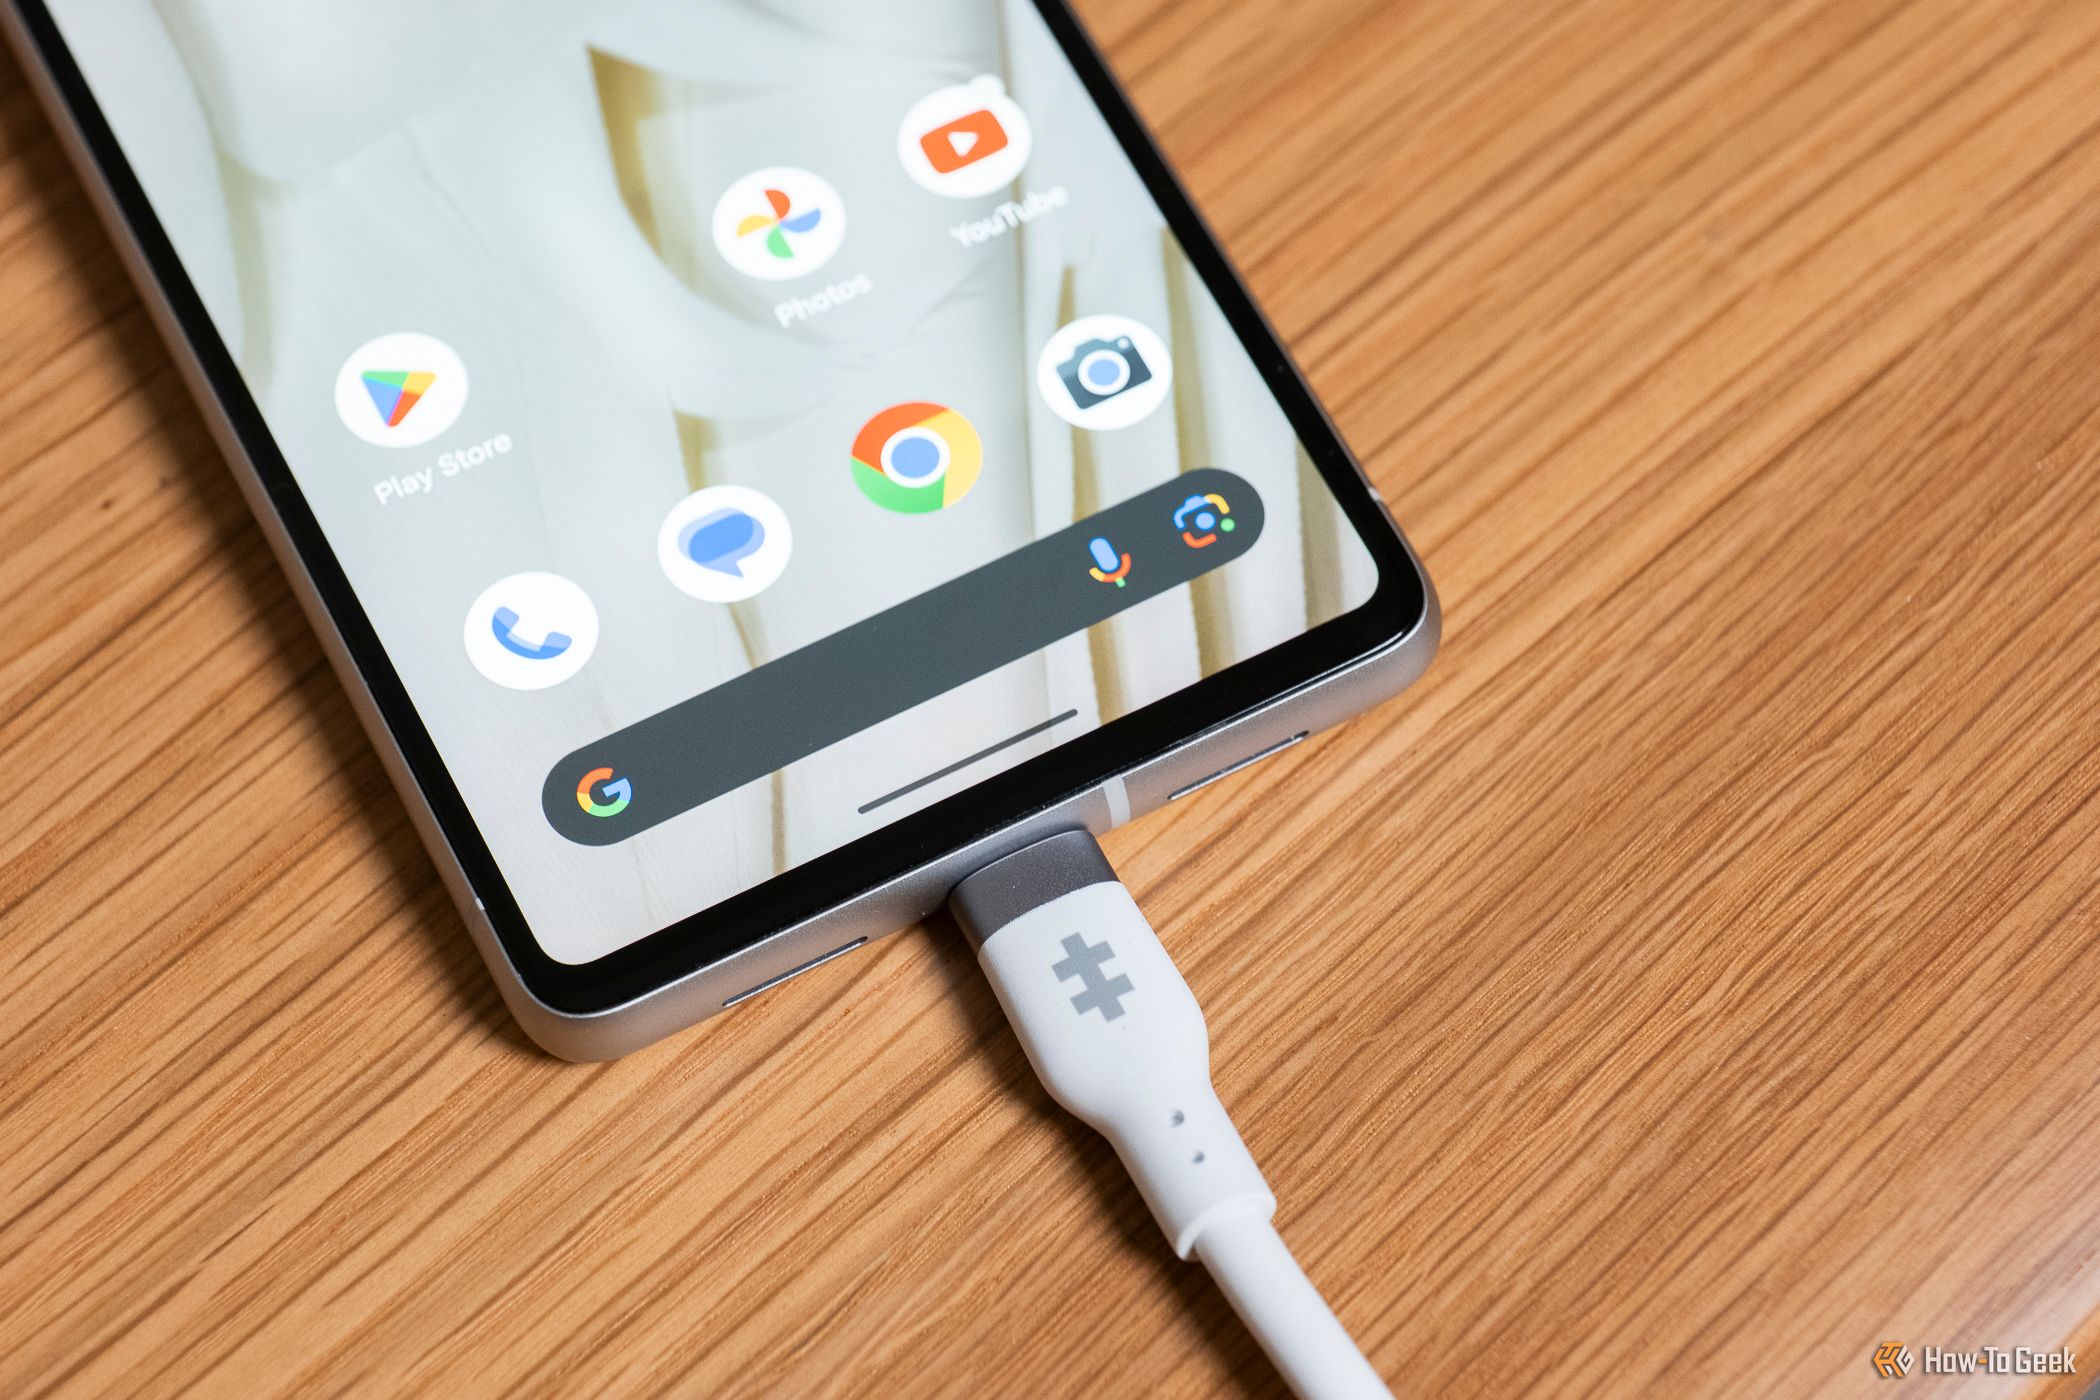 The Hyper HyperJuice 240W Silicone USB-C to USB-C Cable plugged in a phone